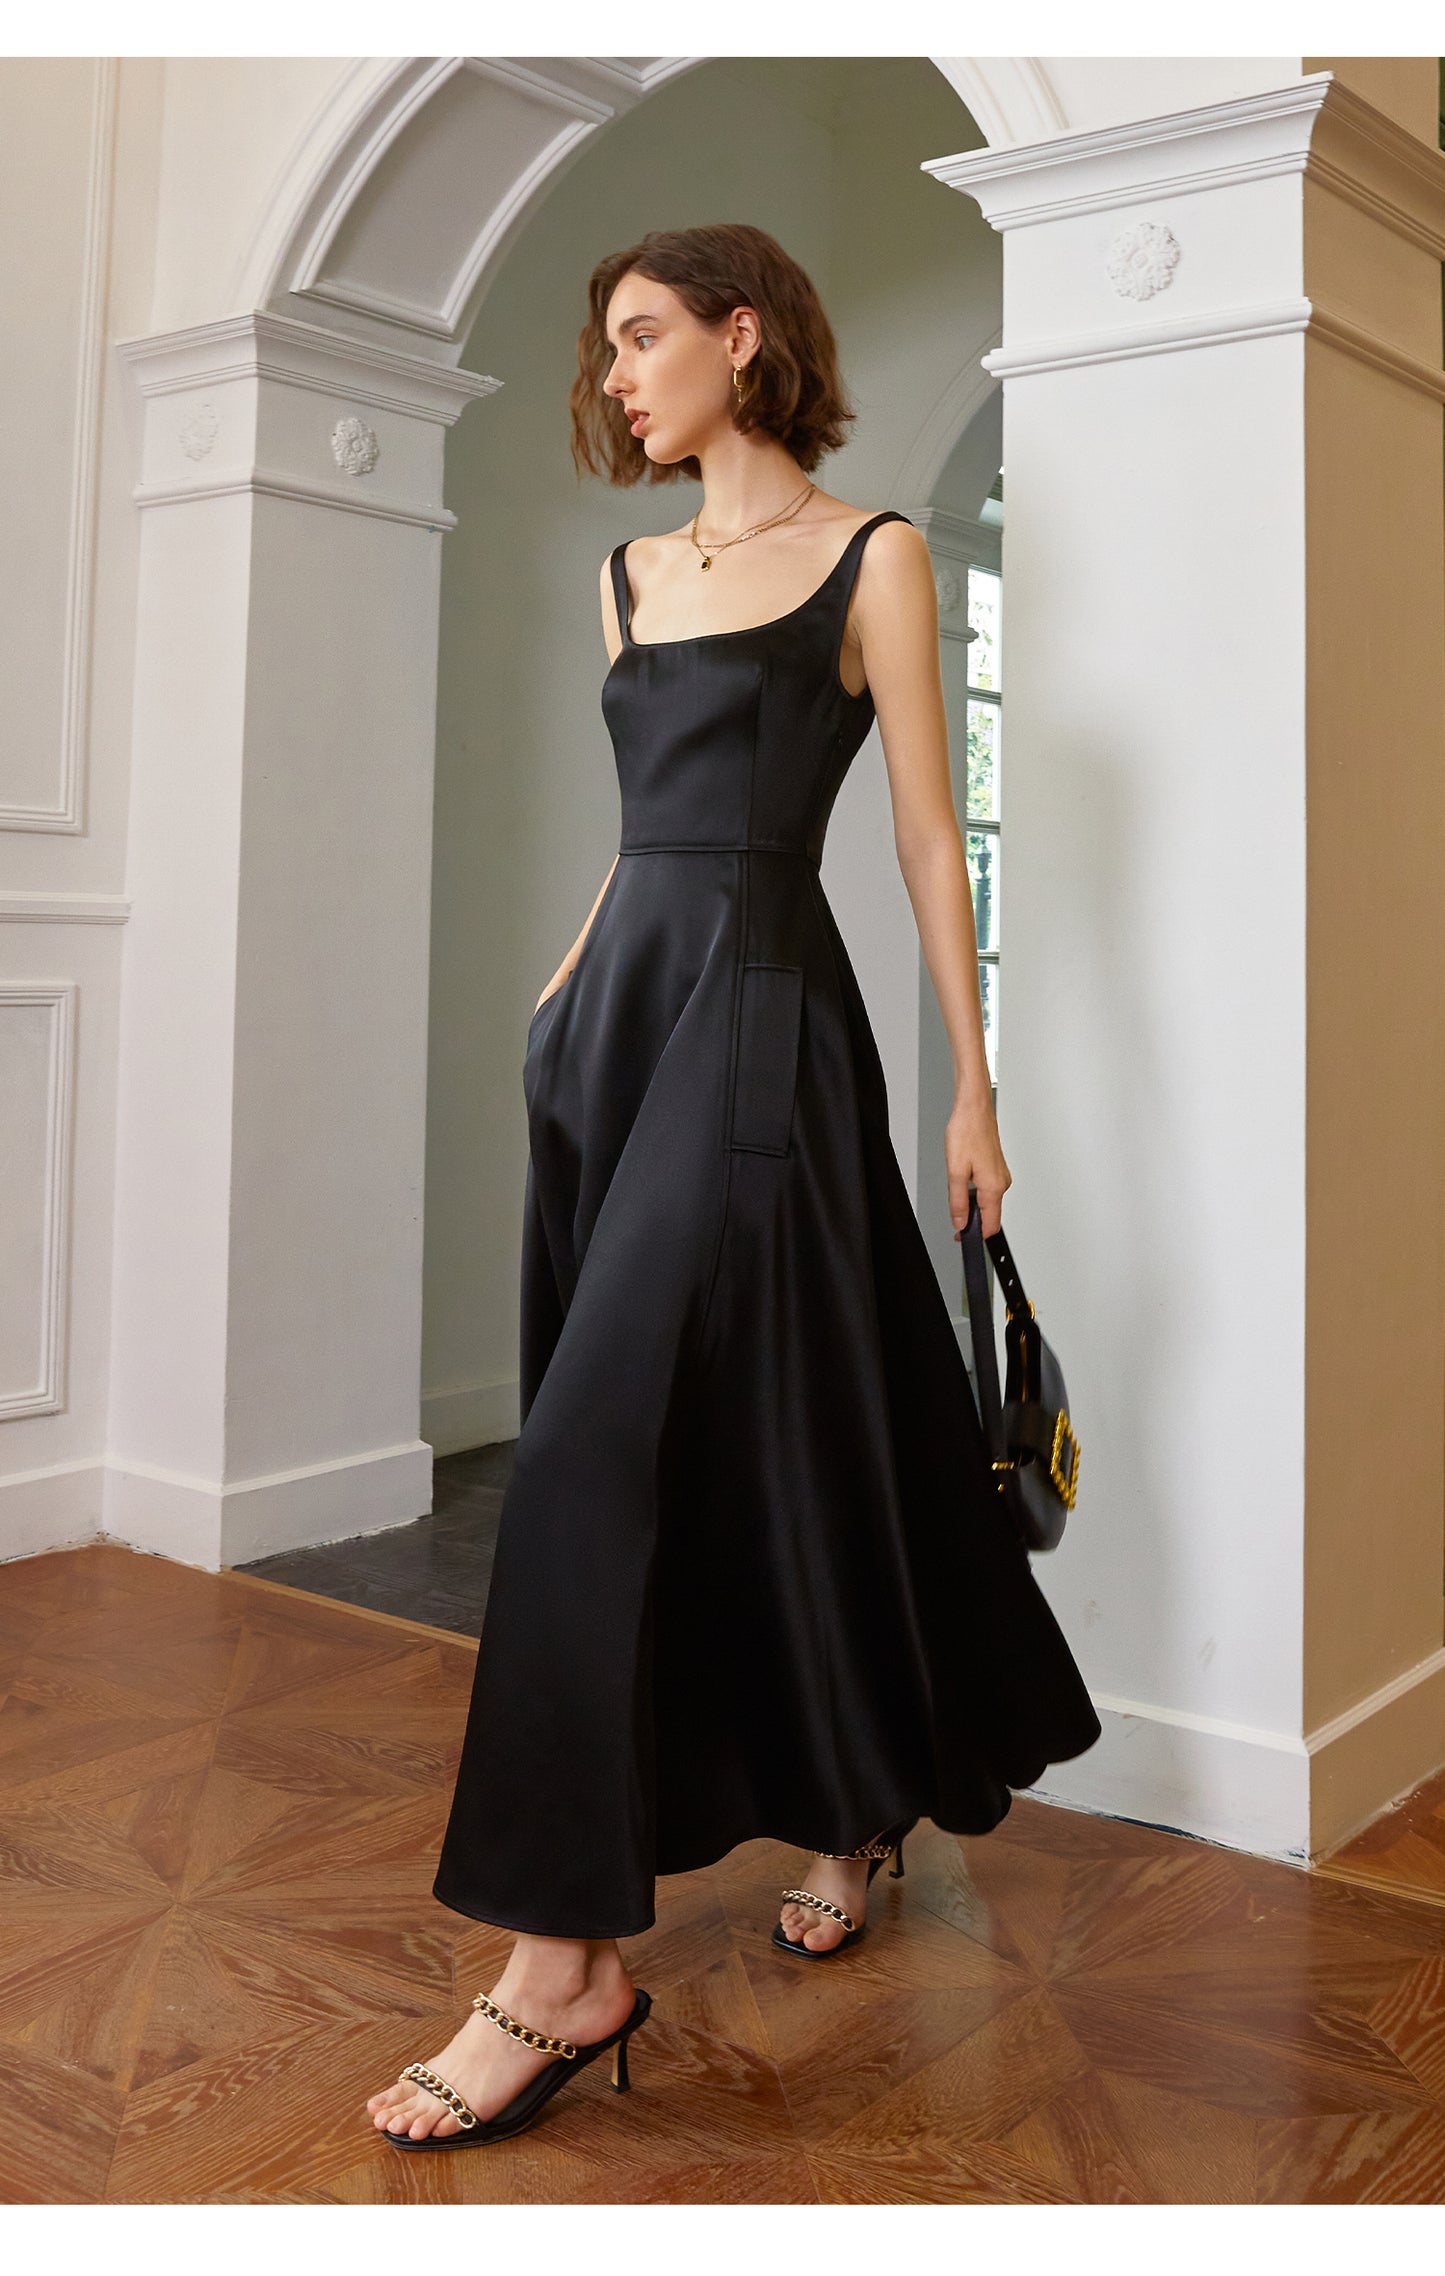 Sleeveless  long skirt and comes in a black and white dress-  Molna